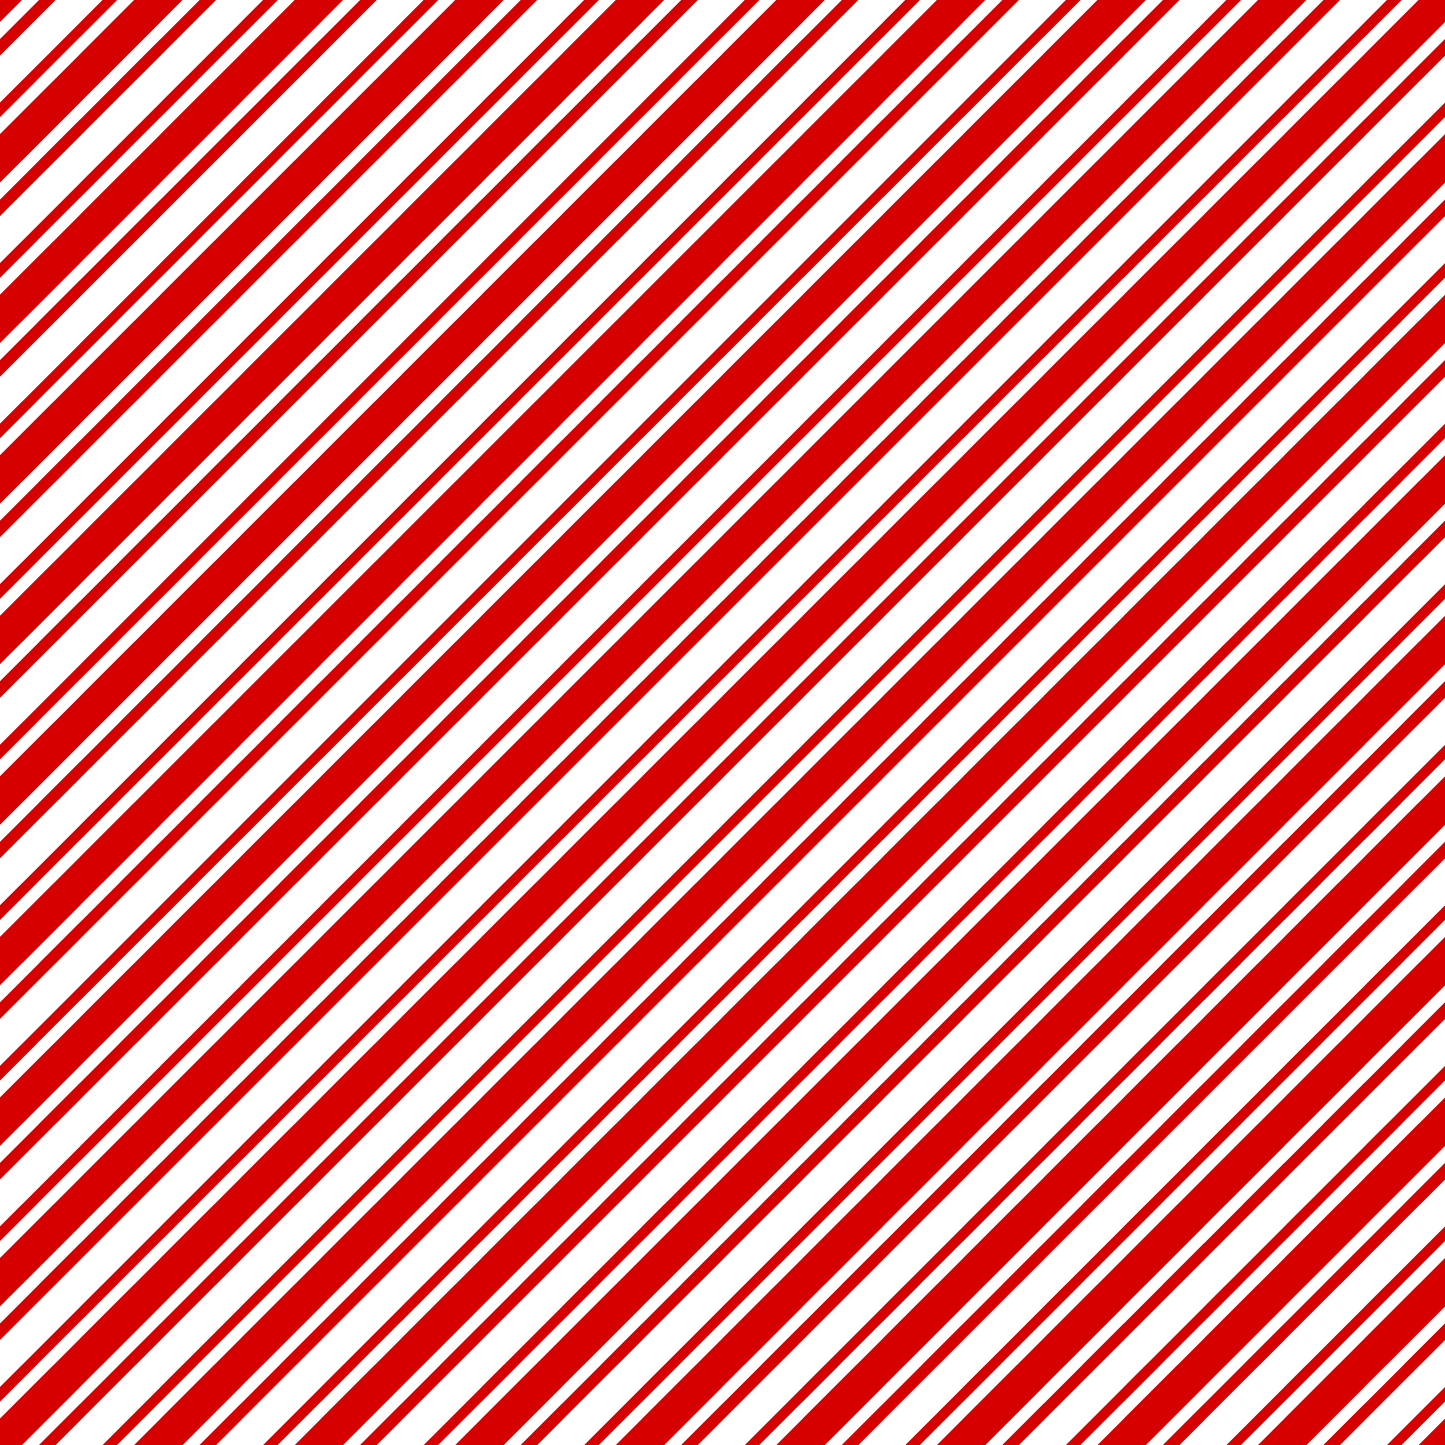 Candy Cane Stripes - Red Stripes 009